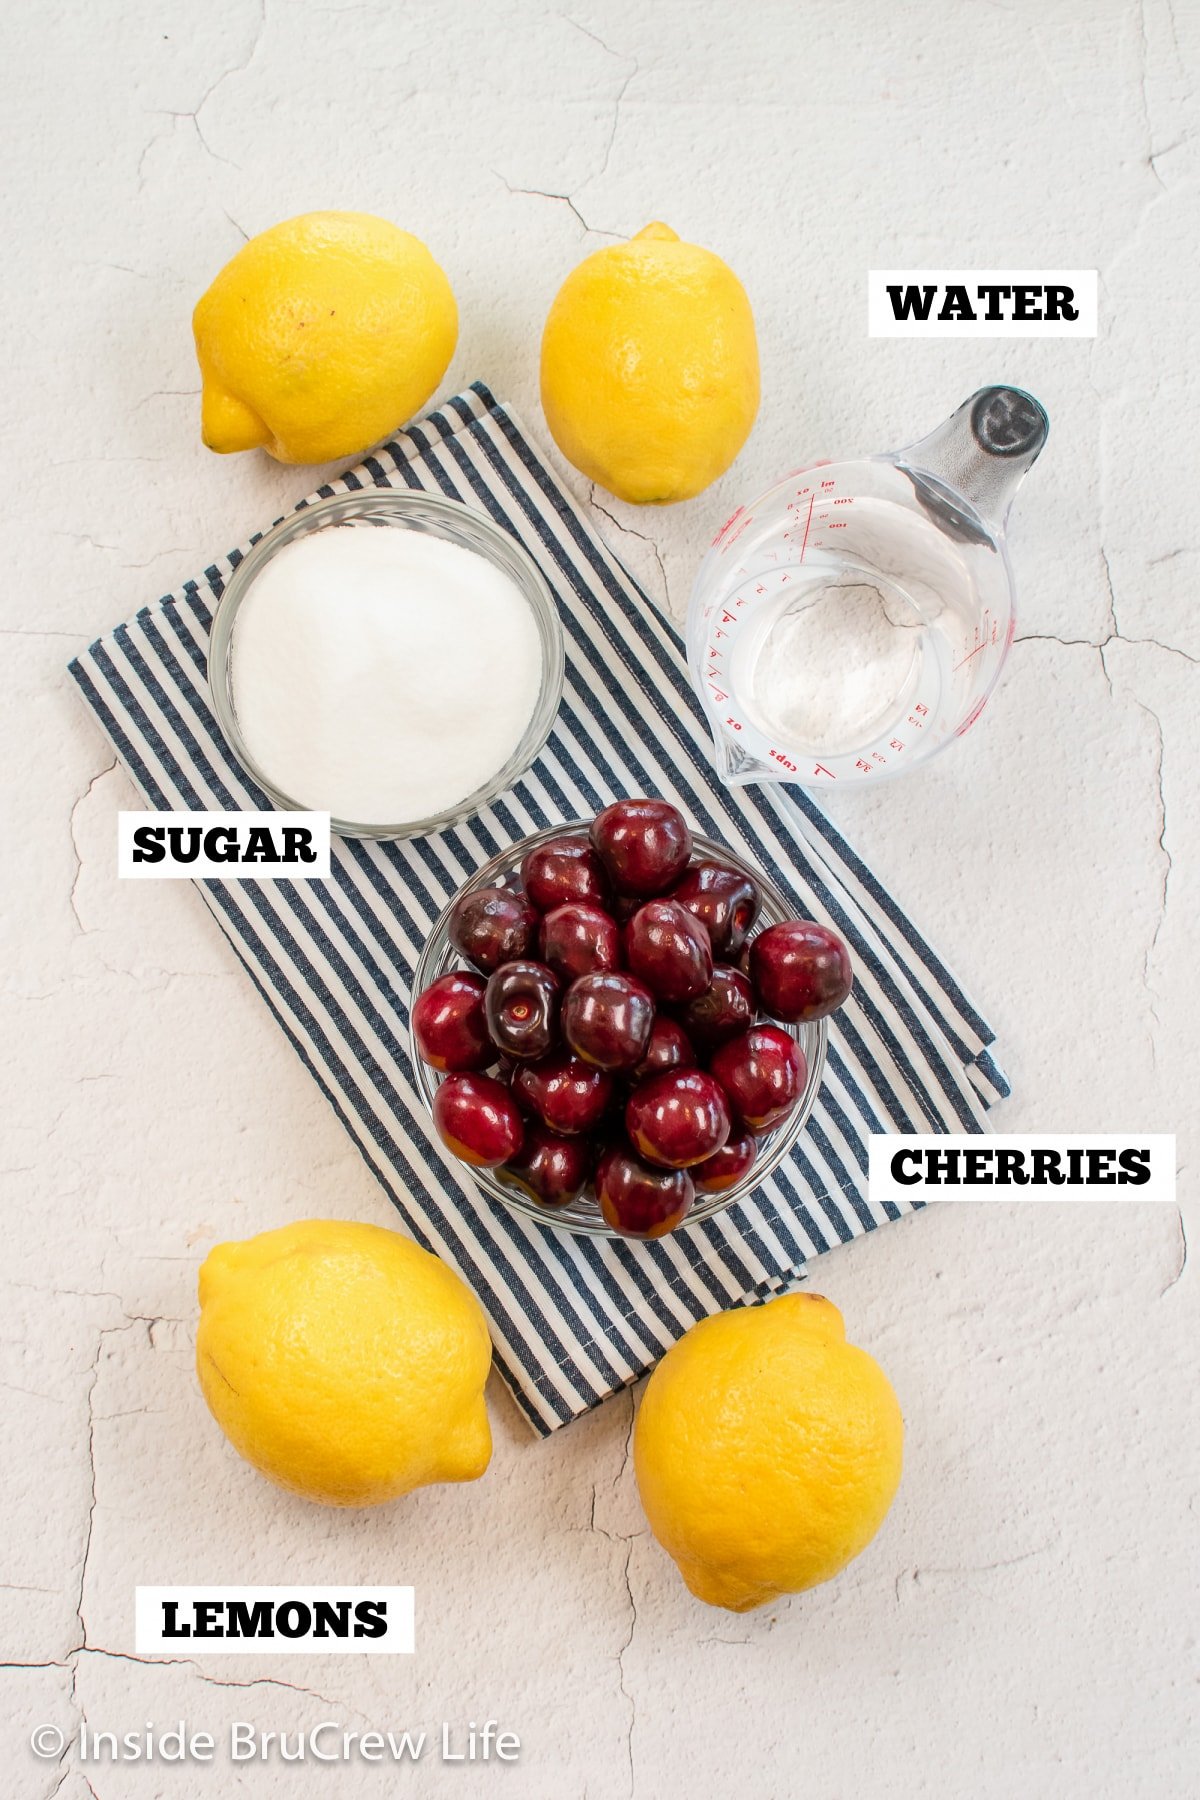 A white board with ingredients needed to make lemonade with cherries.